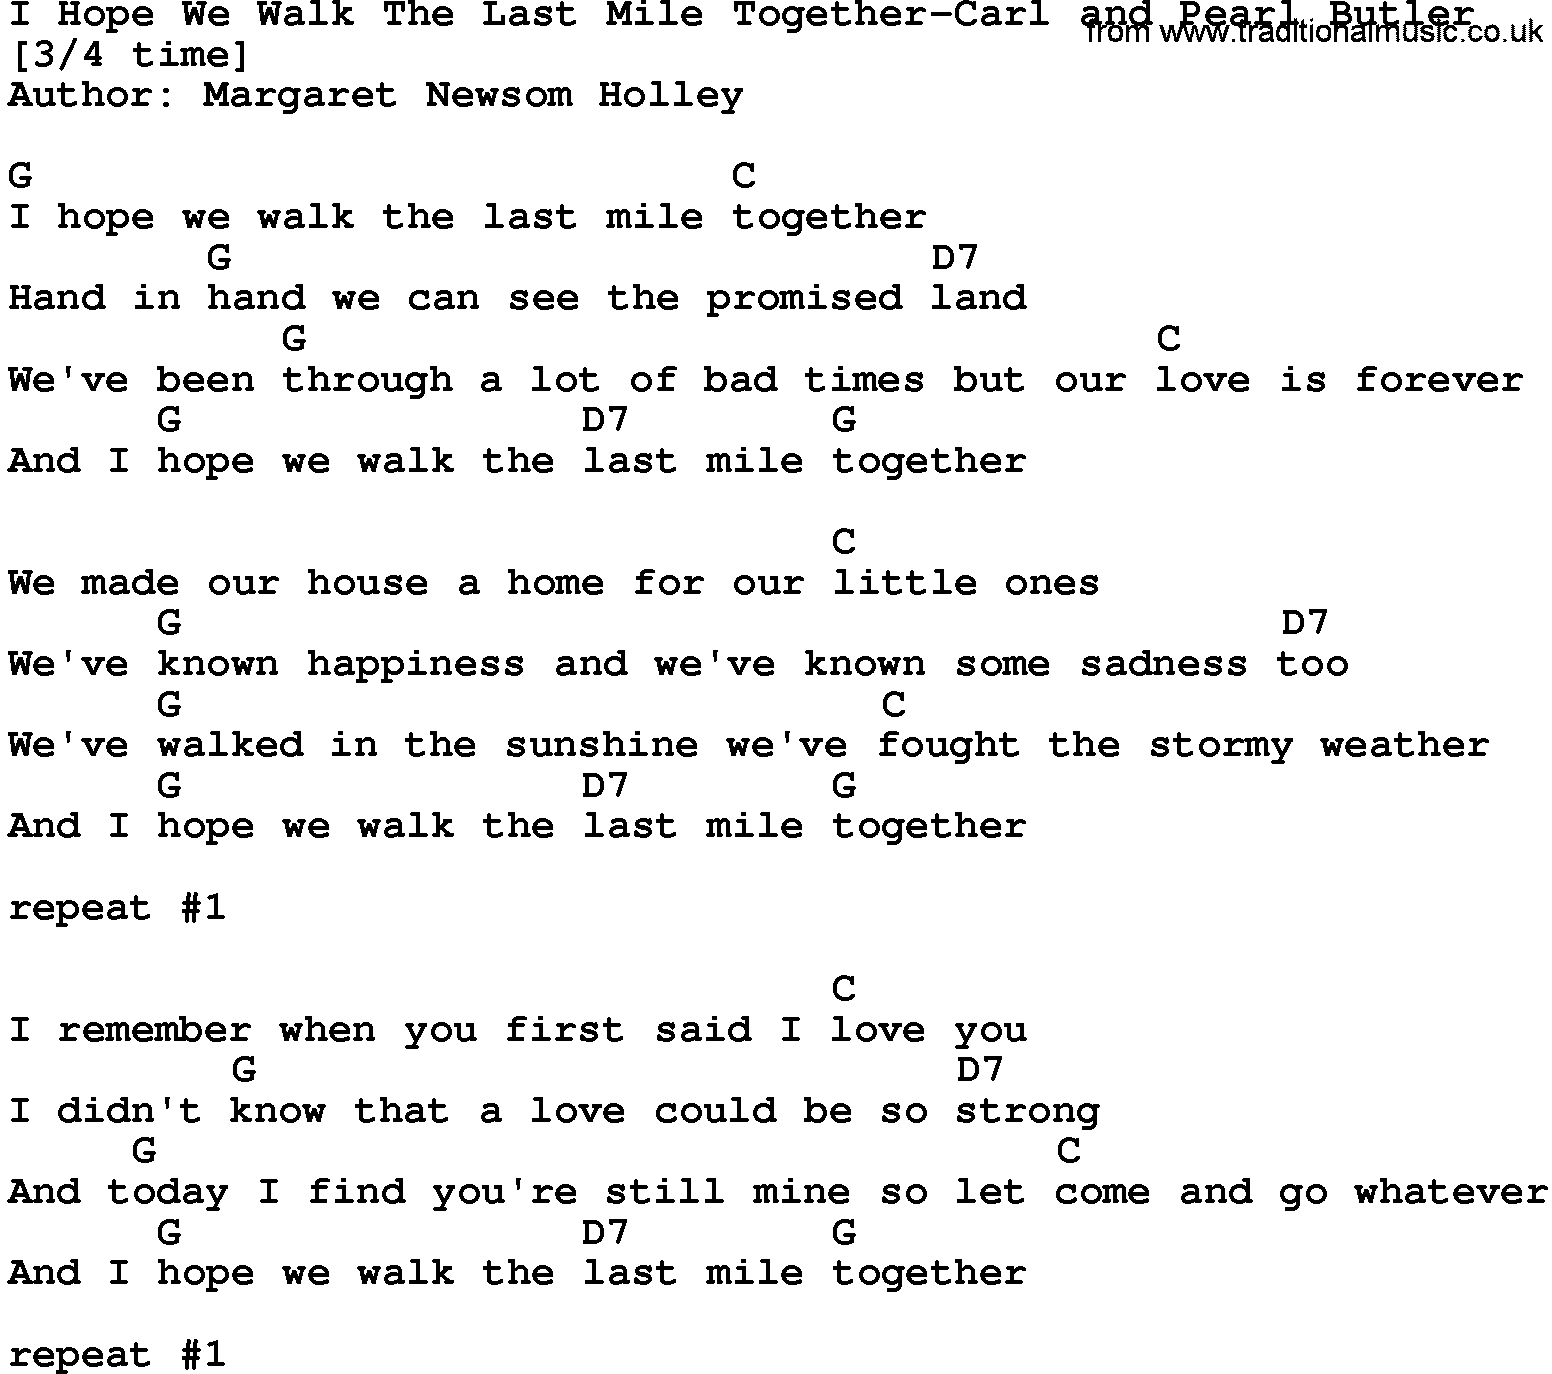 Country music song: I Hope We Walk The Last Mile Together-Carl And Pearl Butler lyrics and chords